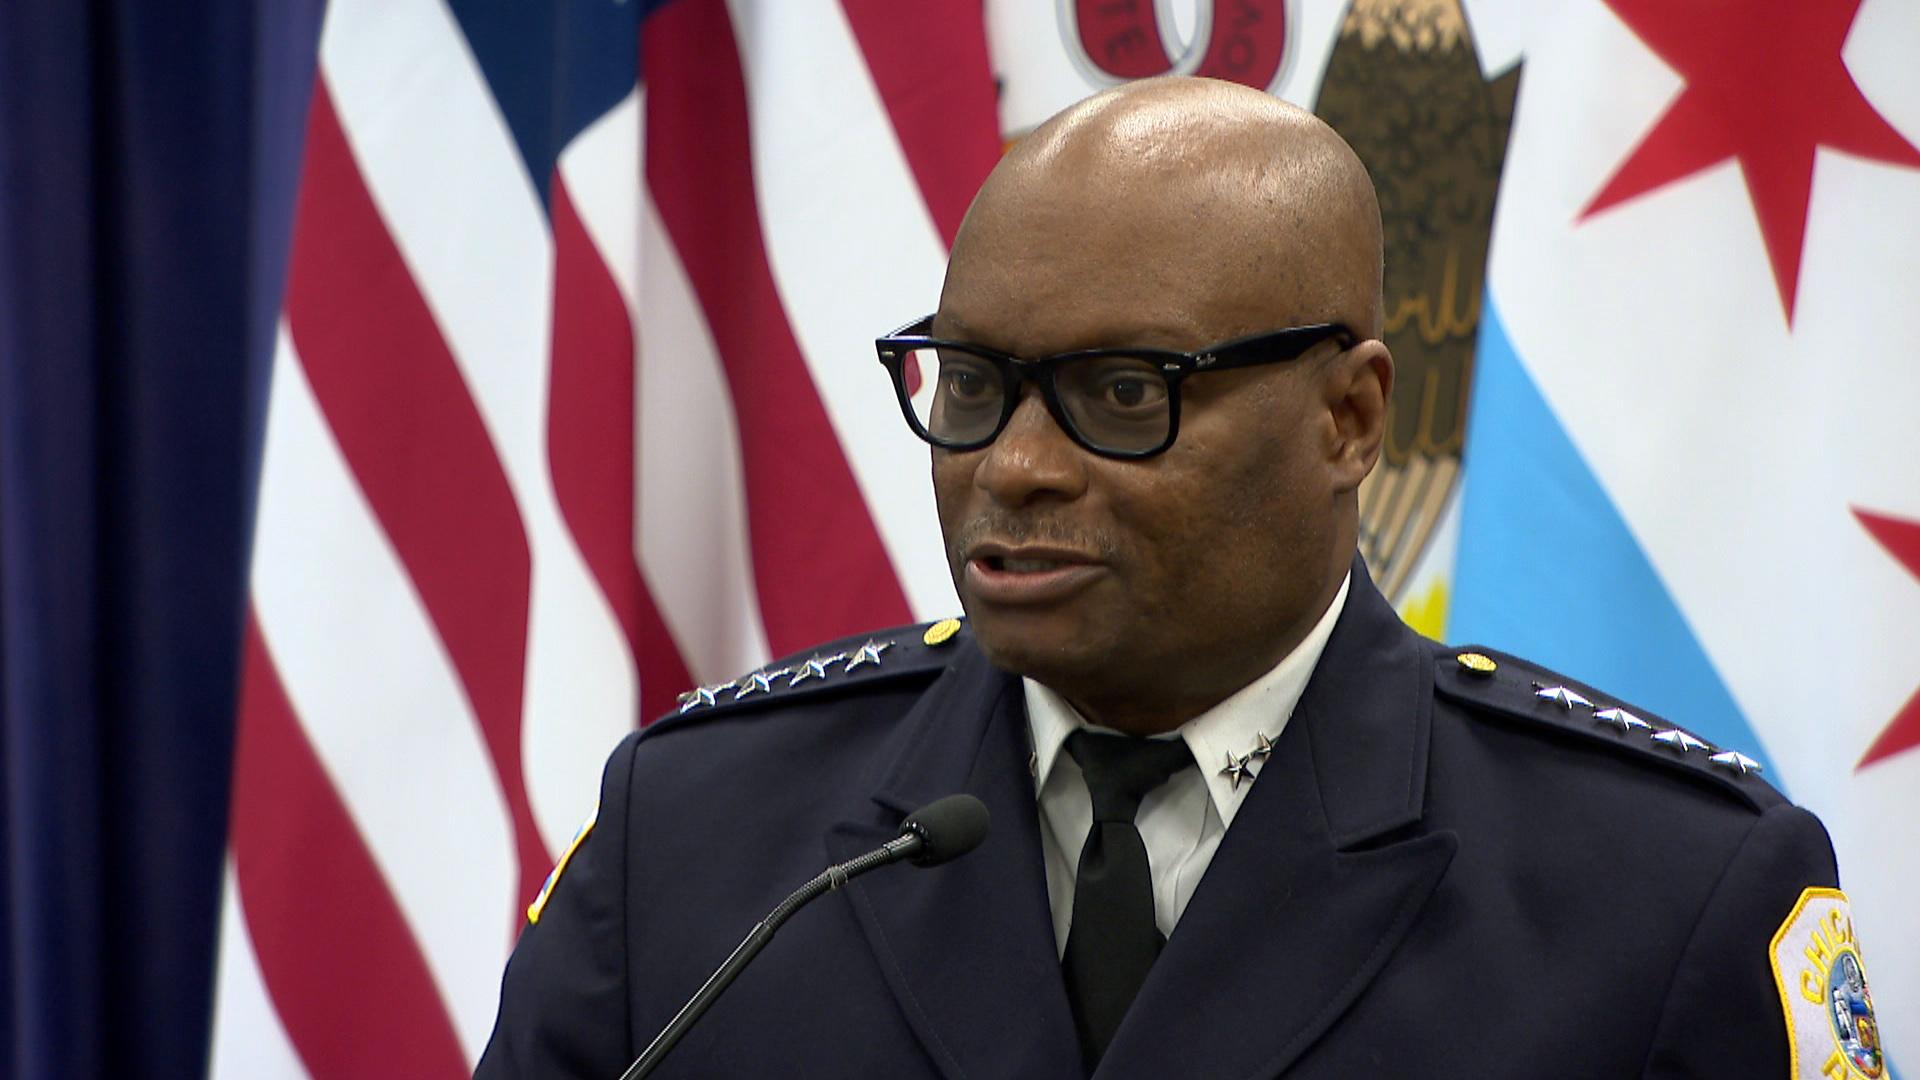 Chicago Police Superintendent speaks to reporters at police headquarters Thursday, April 22, 2021. (WTTW News)